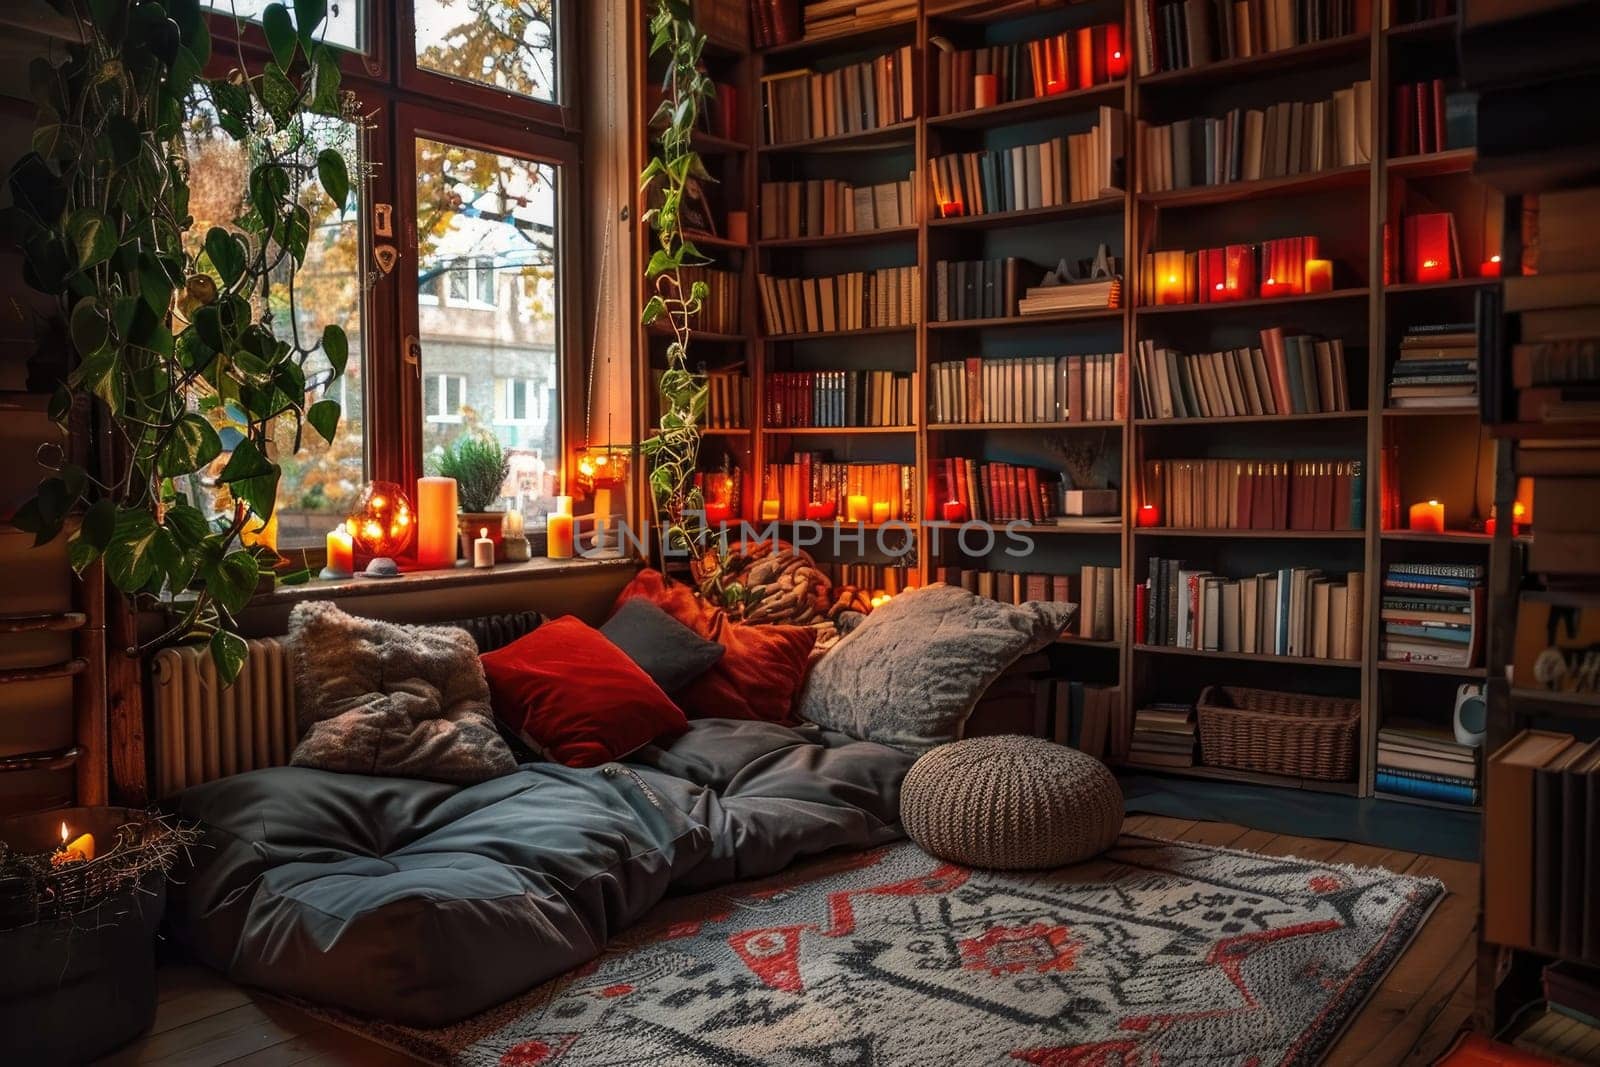 A cozy reading nook with shelves of books. by Chawagen